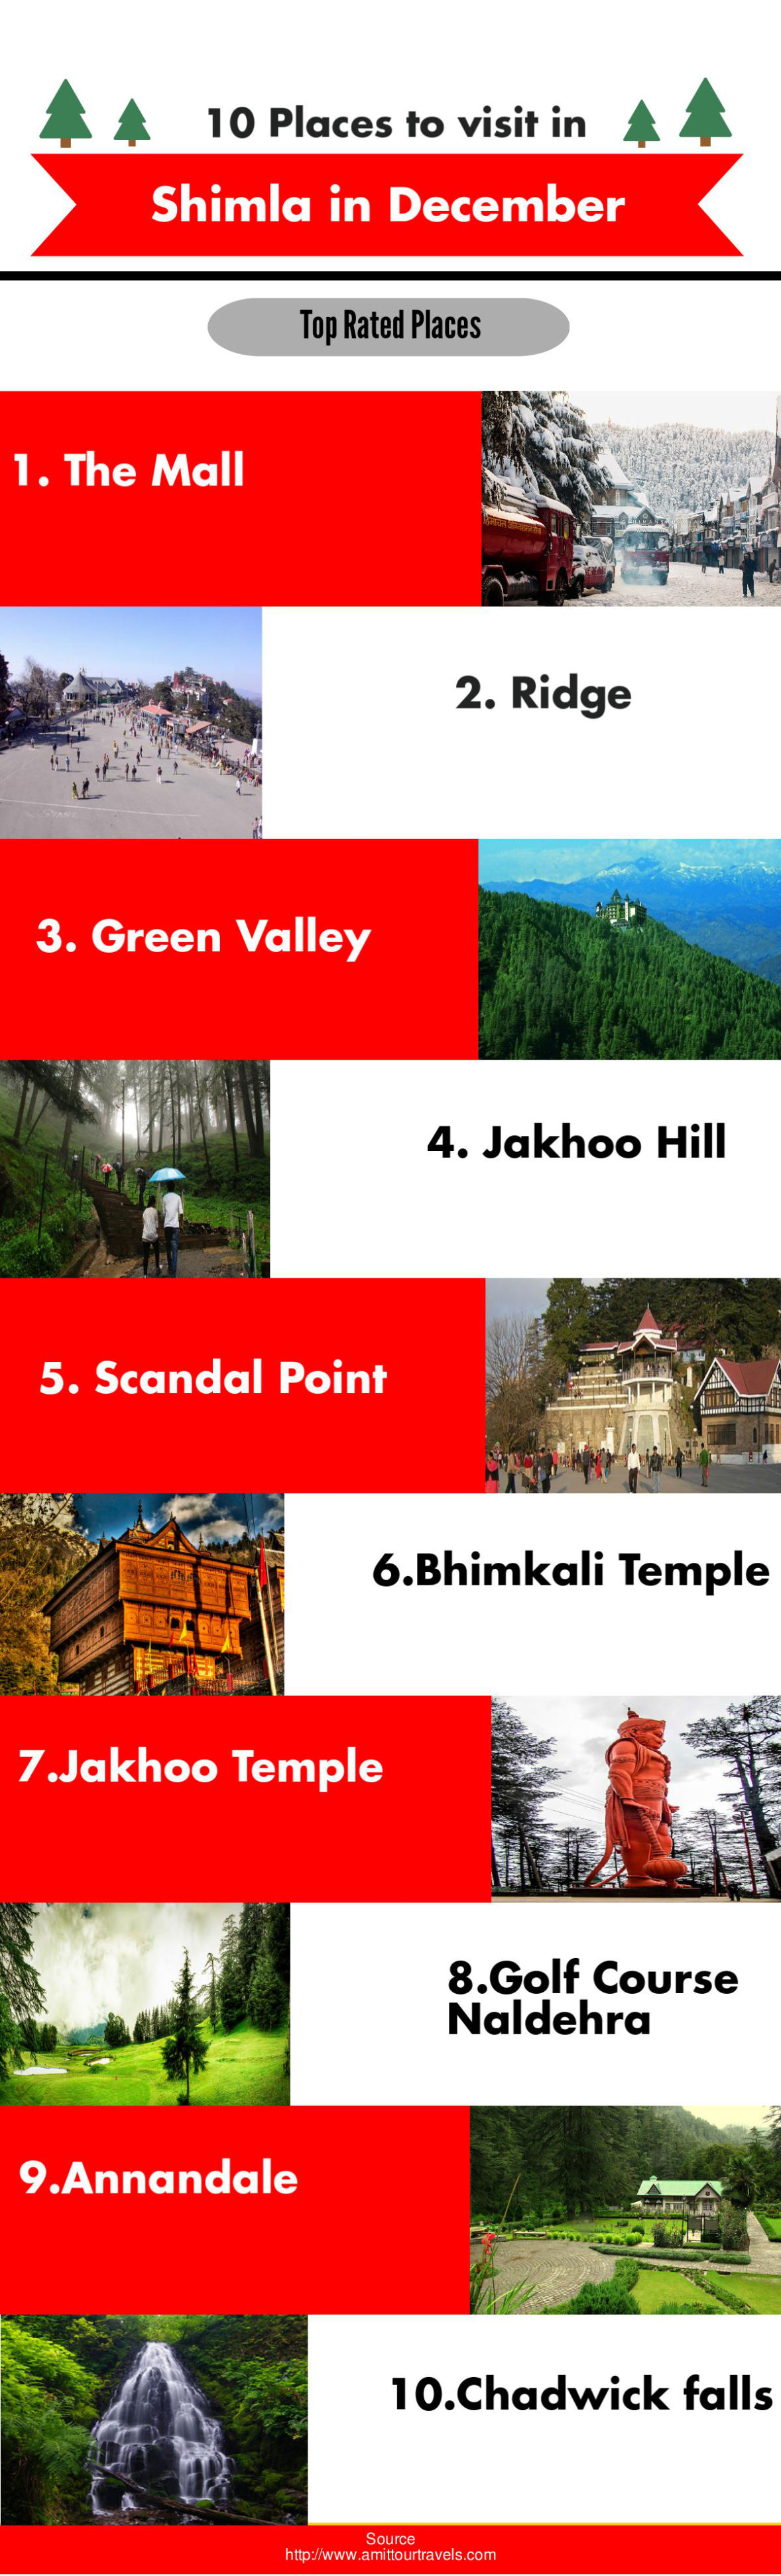 10 Places To Visit in Shimla in December